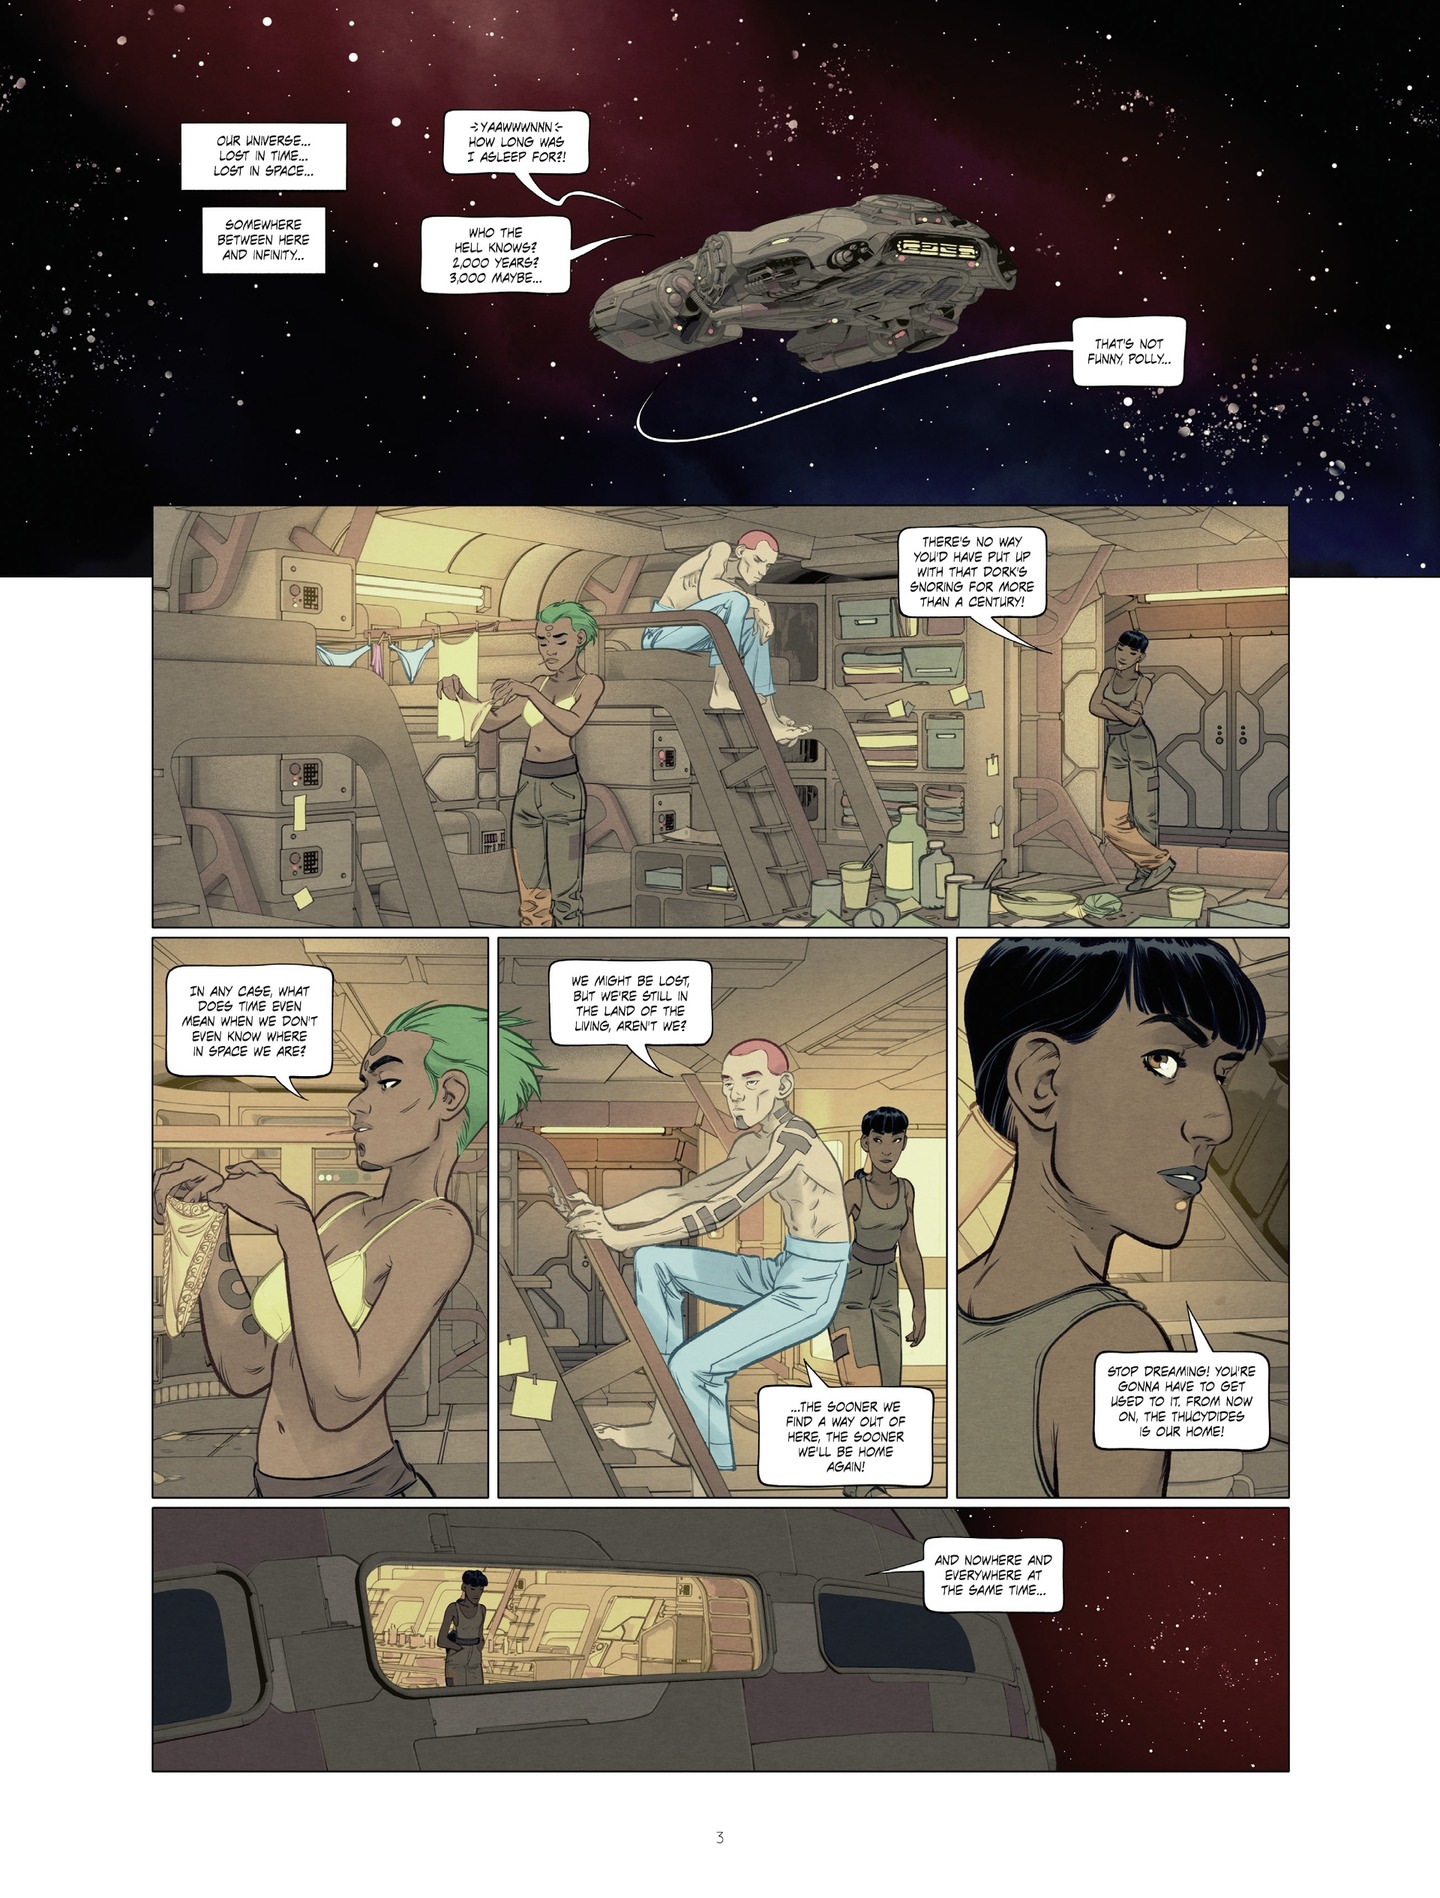 The Universe Chronicles (2020-): Chapter 2 - Page 3